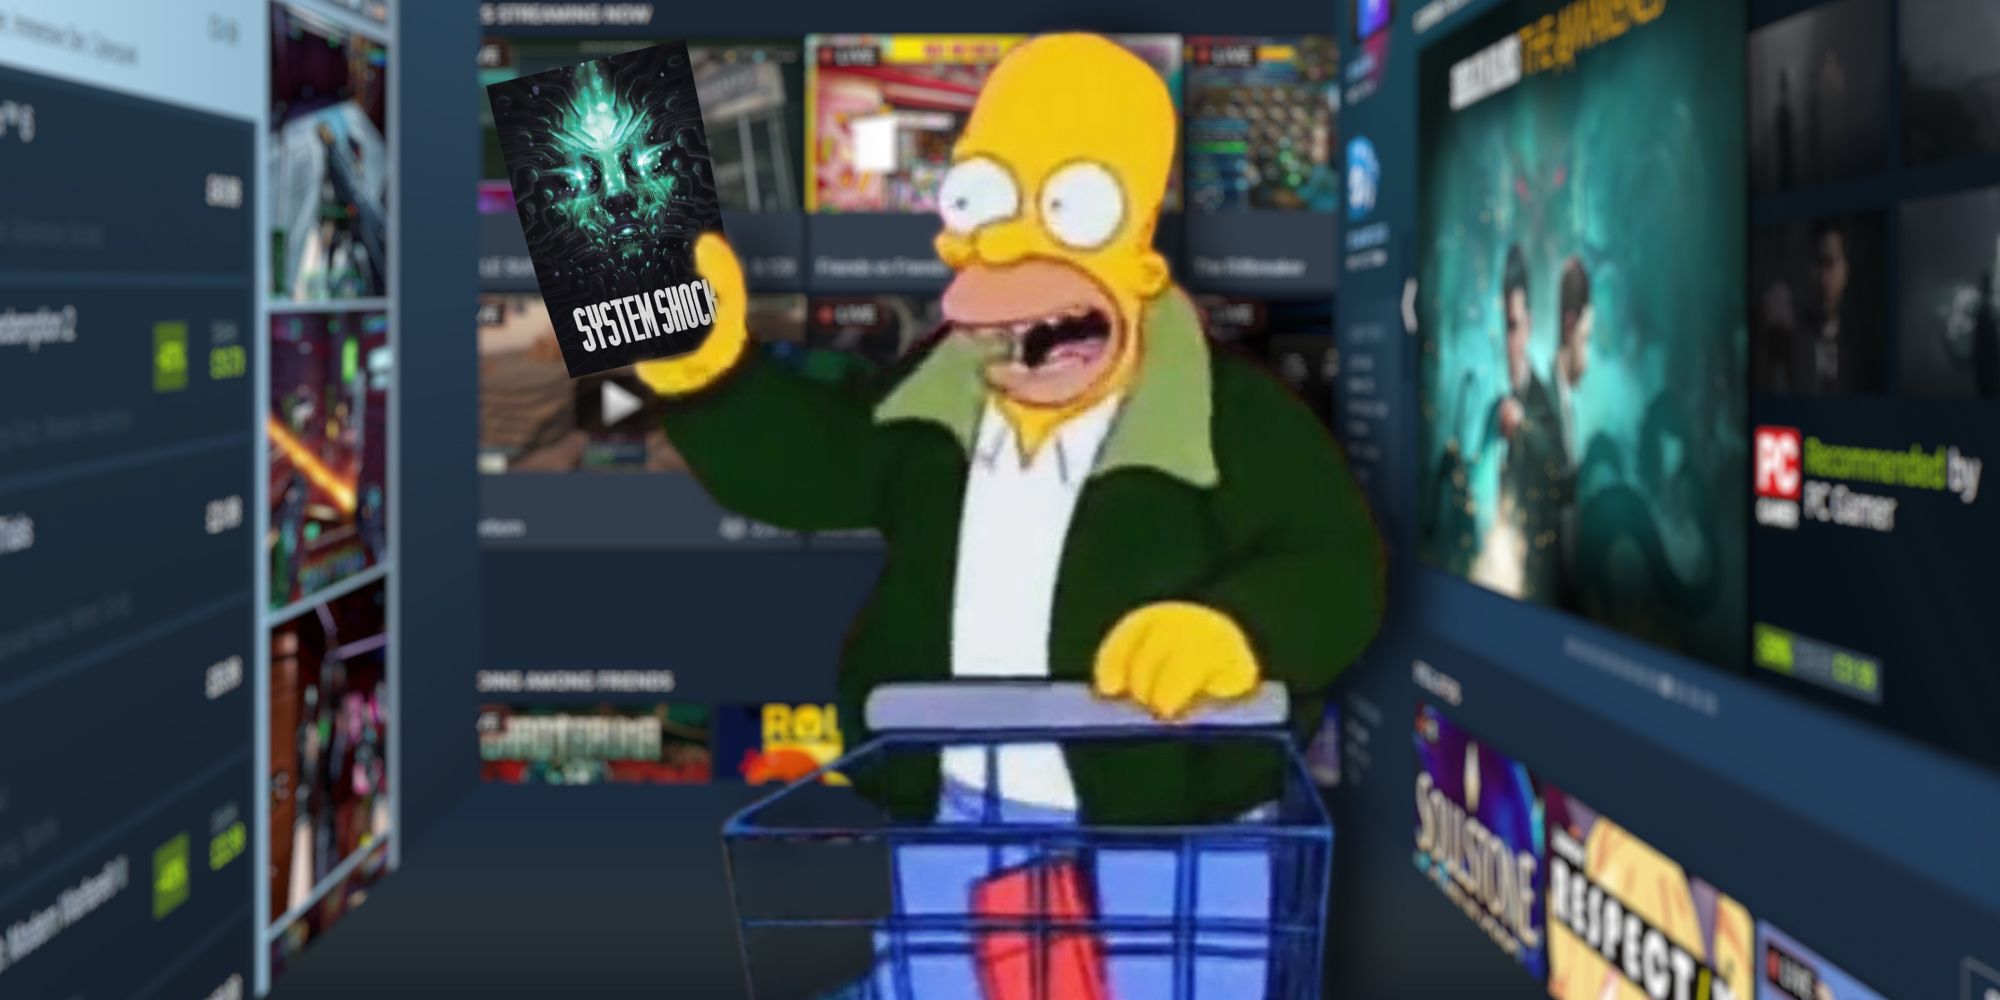 Homer Simpson shopping, holding System Shock, with all the shelves full of Steam sale items